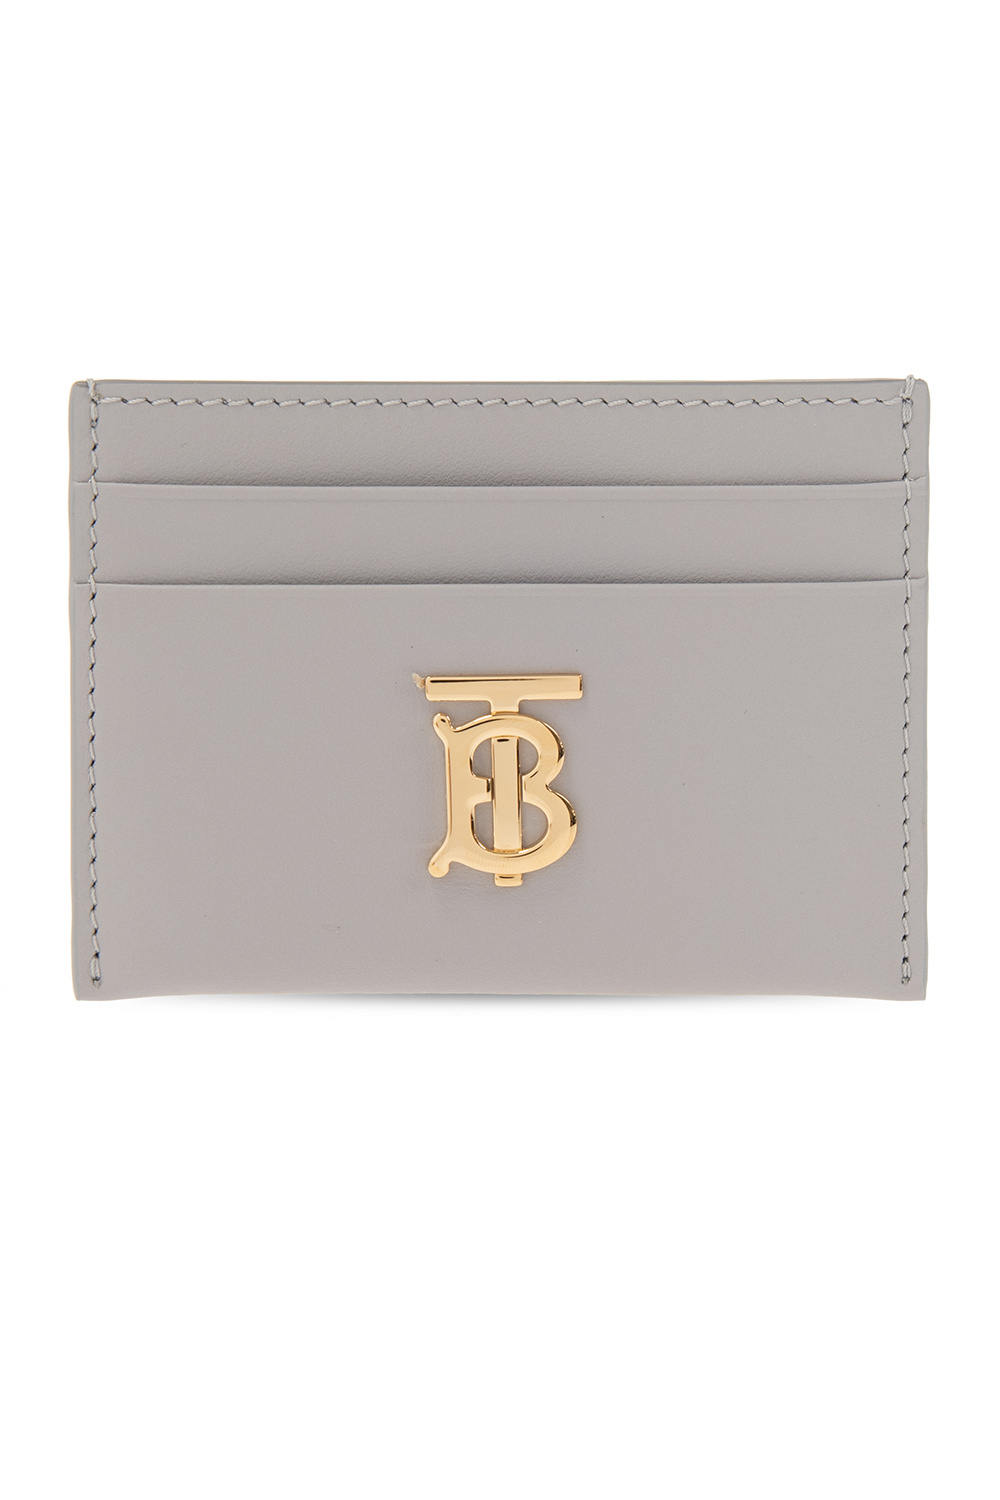 Burberry Leather card holder